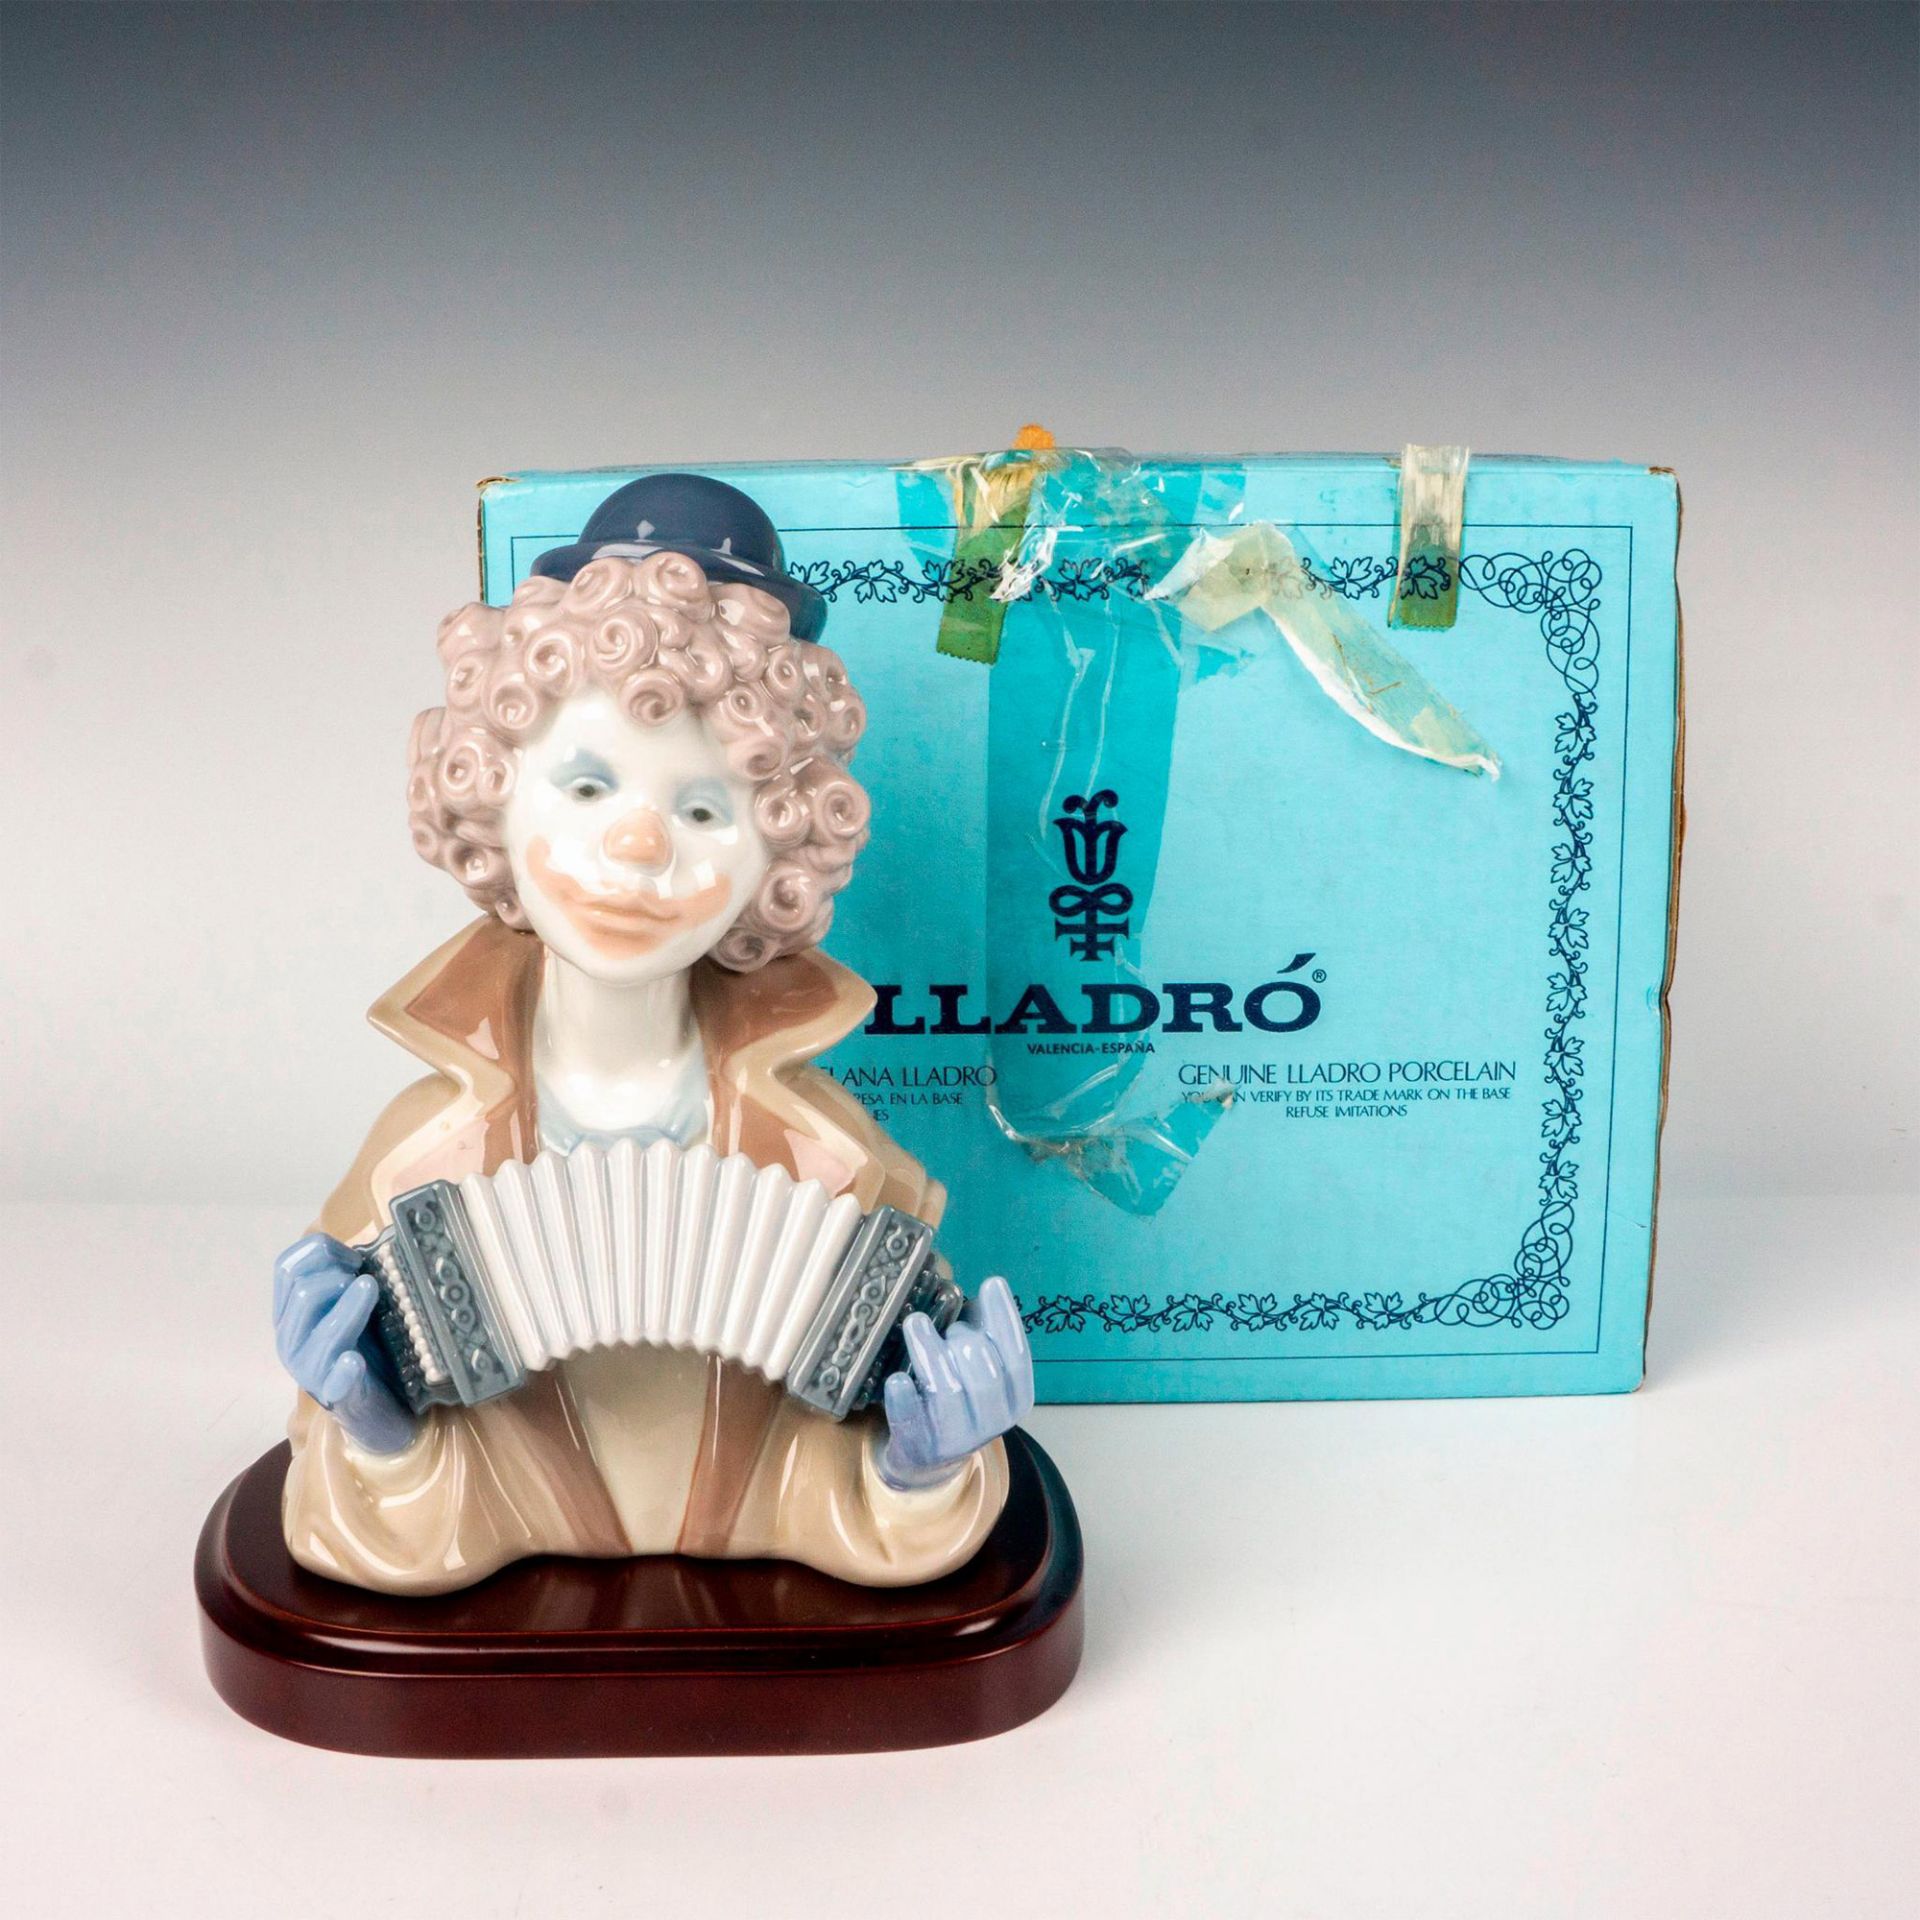 Fine Melody - Lladro Porcelain Figure - Image 4 of 4